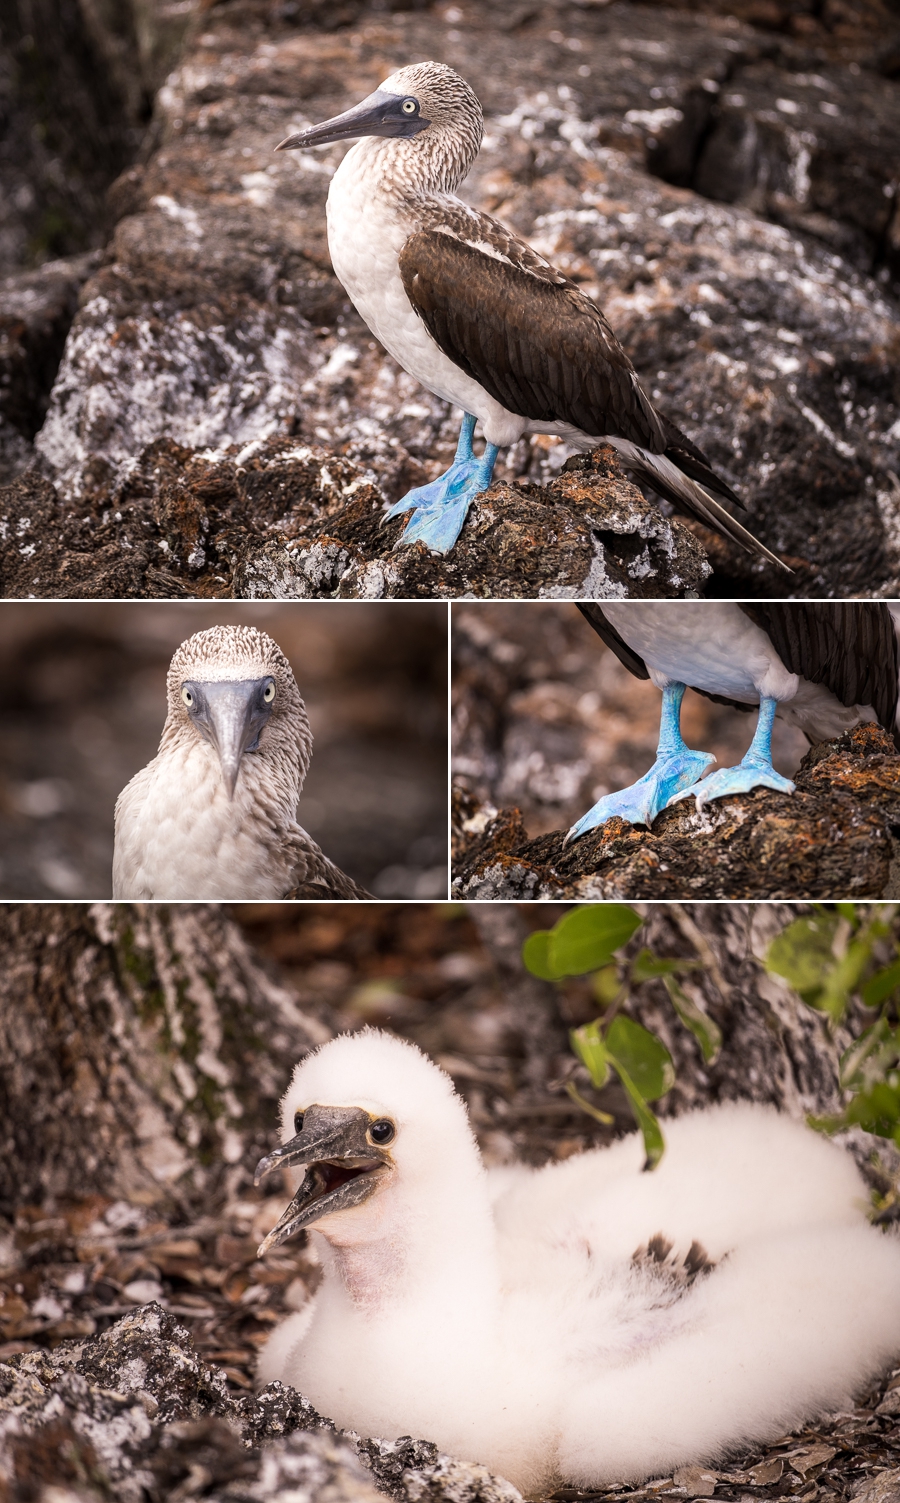 Images of a Blue-footed Boobie at Los Túneles, and a fluffy chick